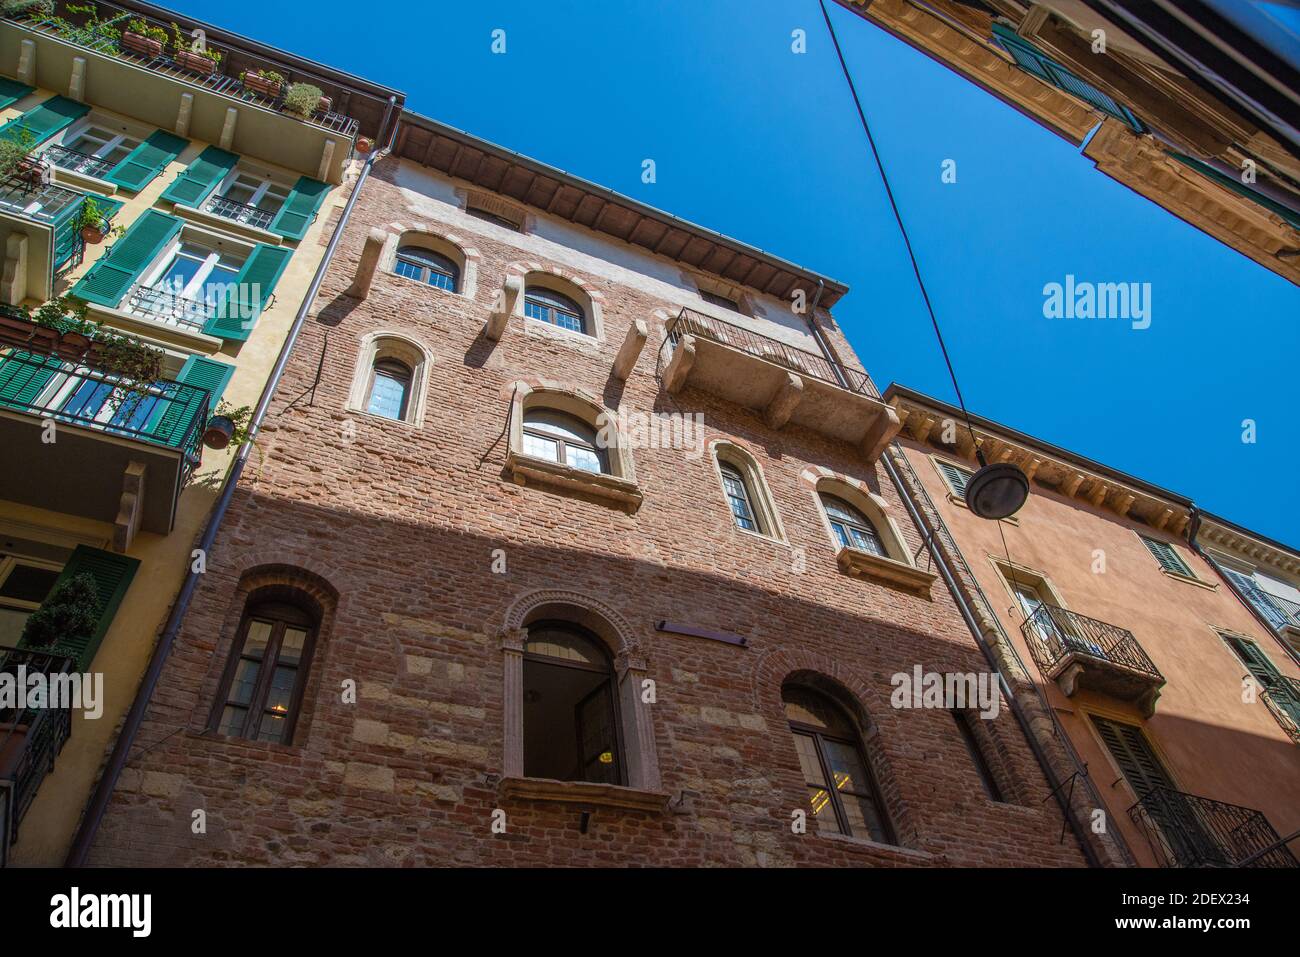 VERONA, ITALY - Aug 18, 2020: View from a narrow alley of a historic house front up to the sky with antique restored houses made of brick, metal and w Stock Photo